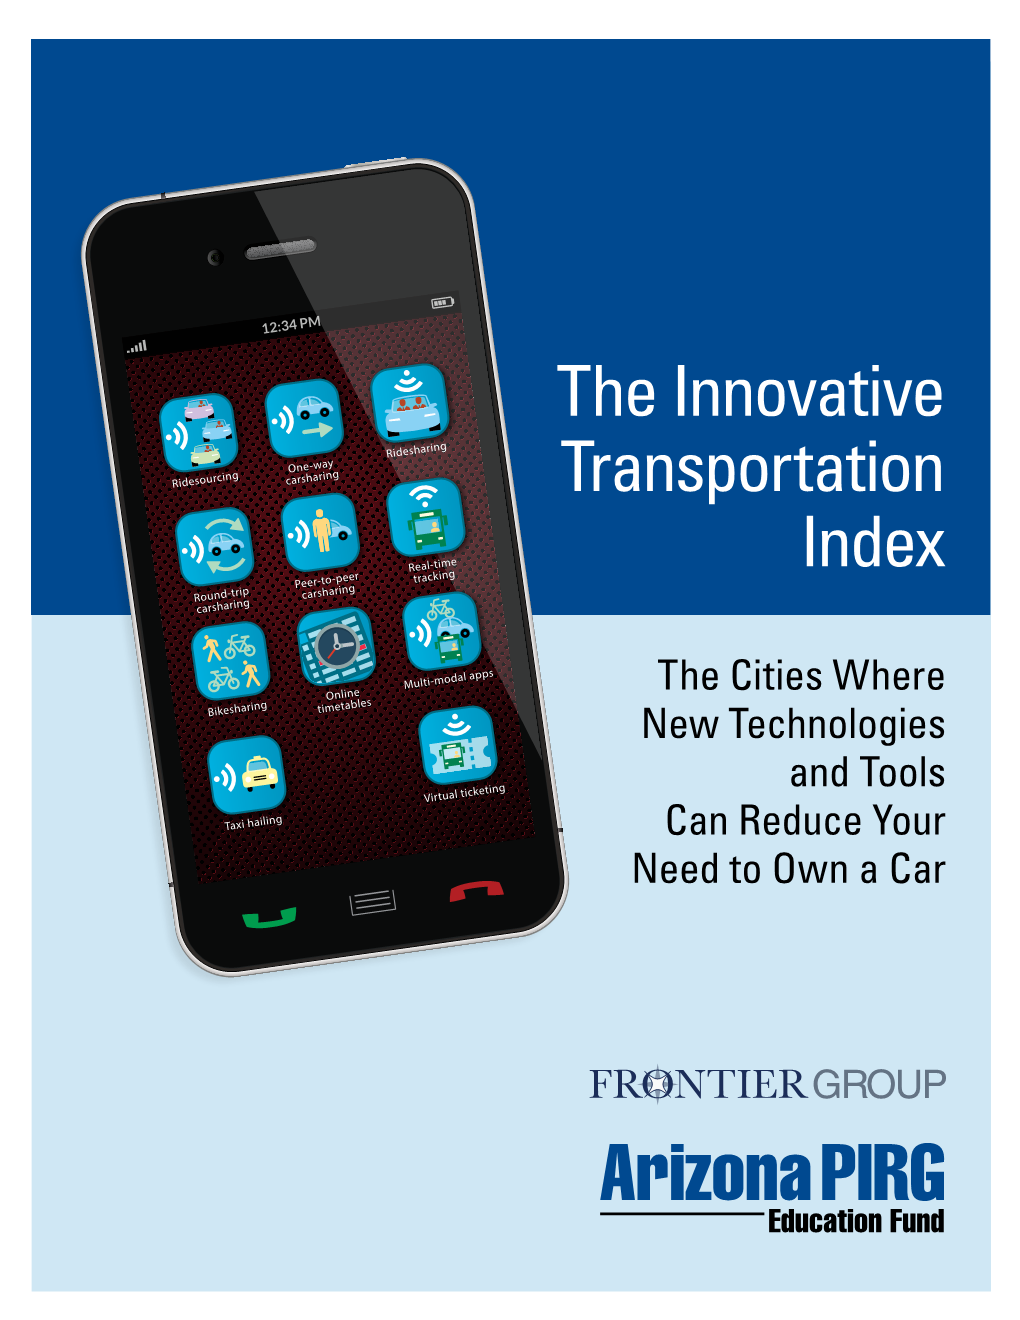 The Innovative Transportation Index the Cities Where New Technologies and Tools Can Reduce Your Need to Own a Car